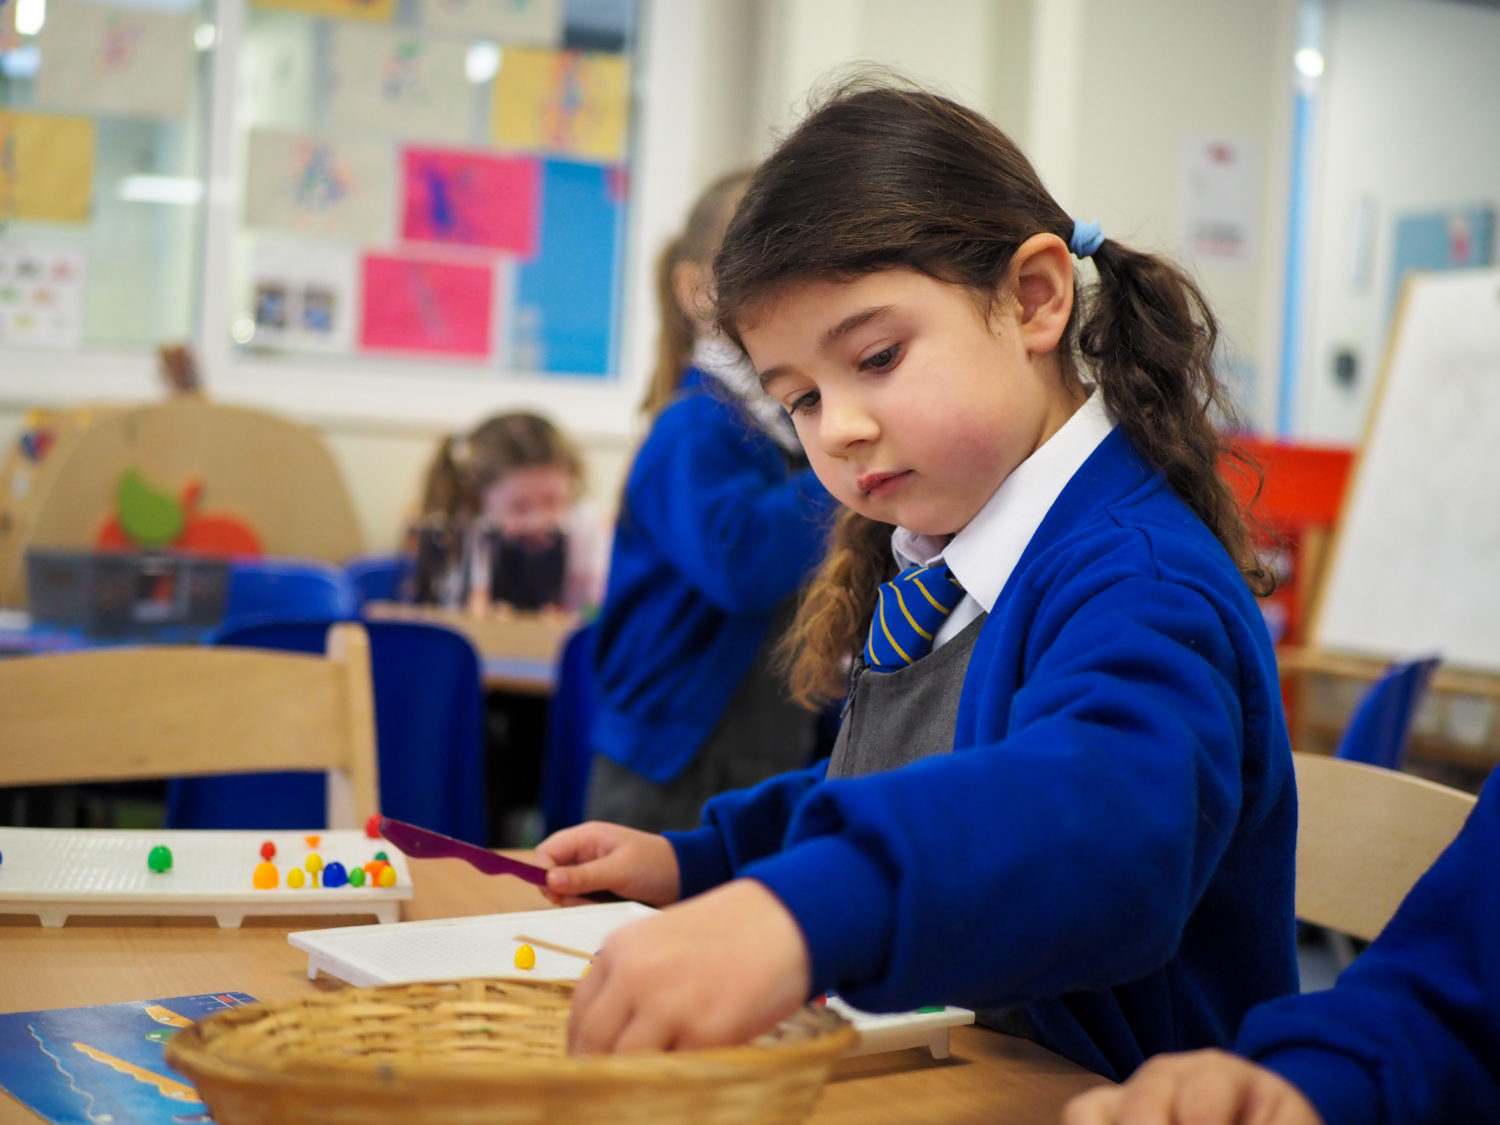 A young girl is seen wearing her academy uniform whilst sitting at a desk, interacting with different coloured objects.